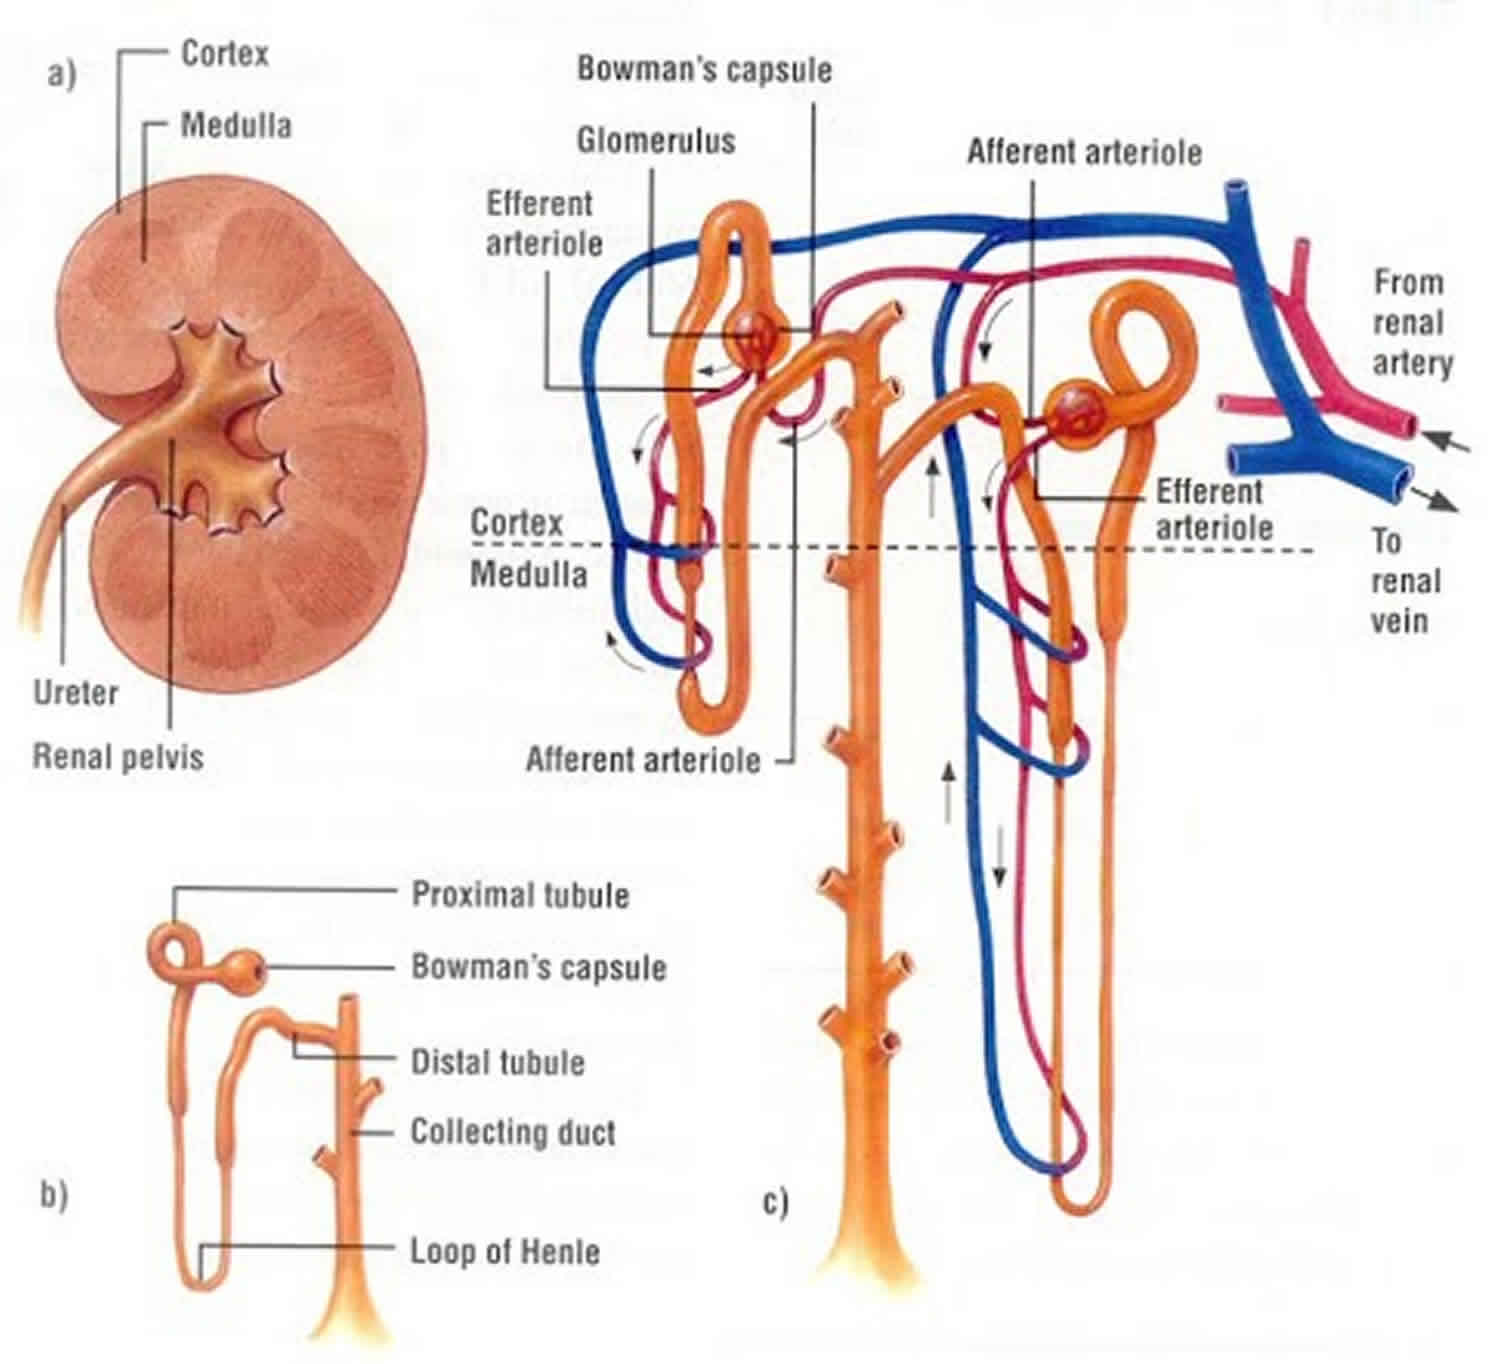 What Is The Process Of Glomerular Filtration And Reabsorption In The Nephron